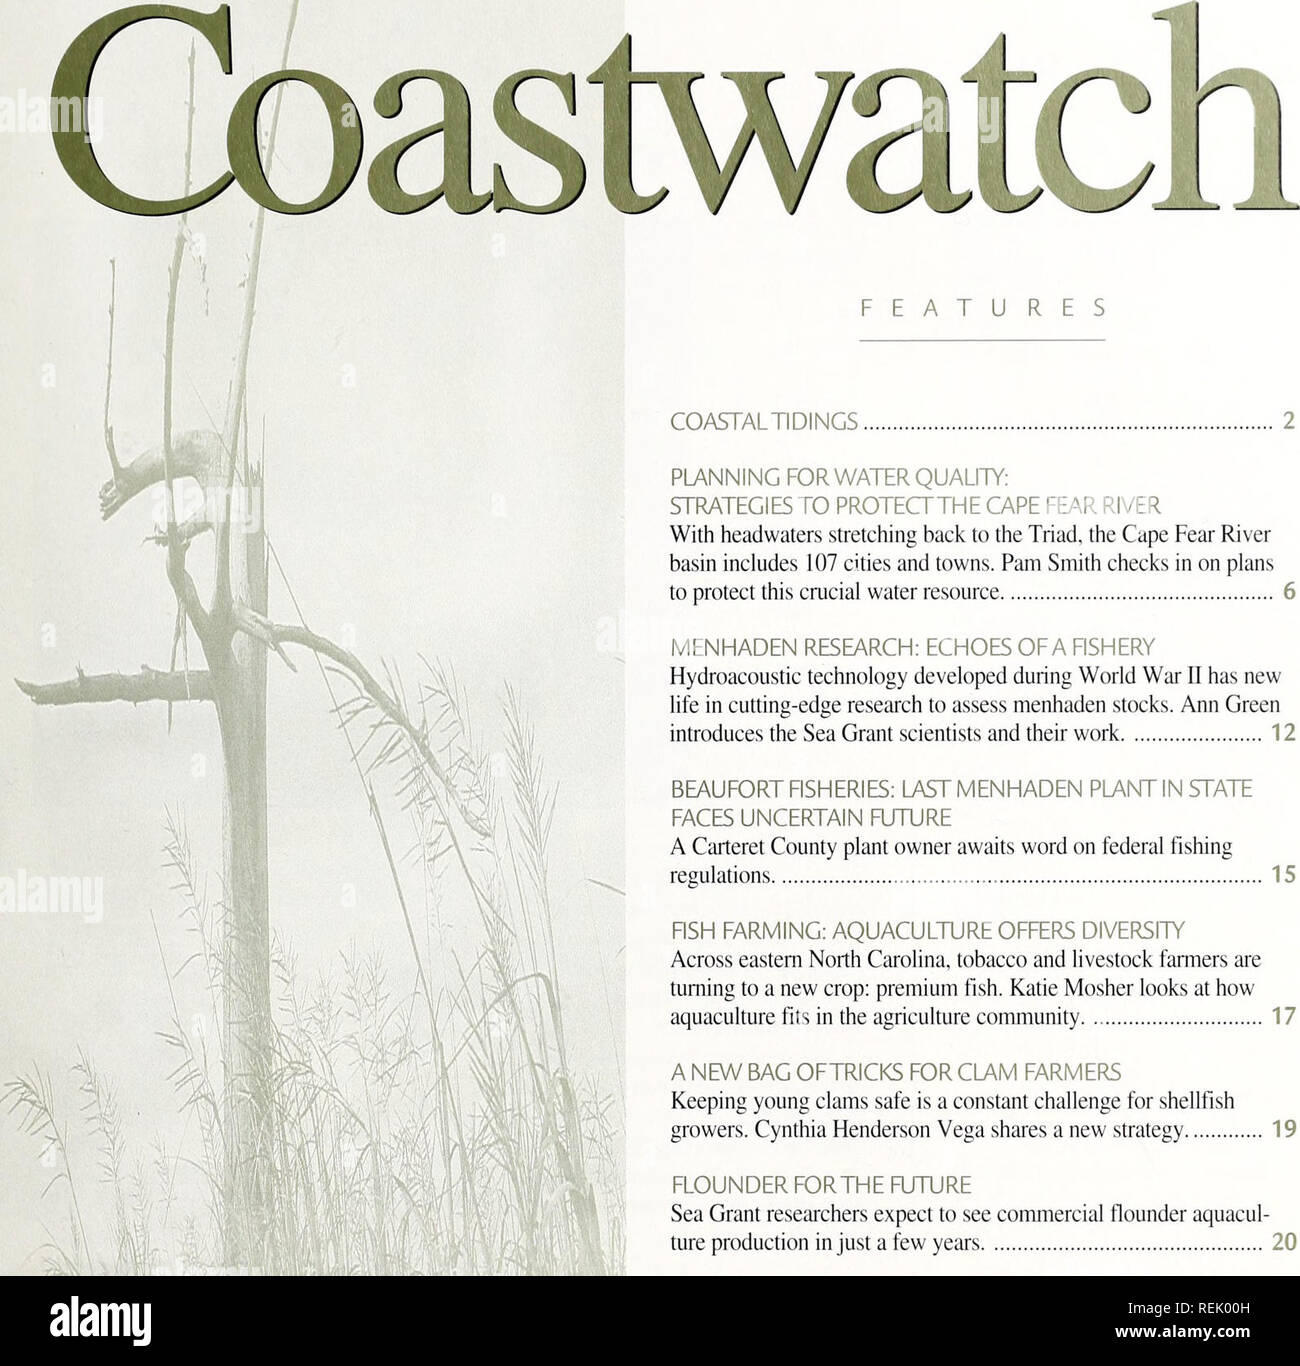 . Coast watch. Marine resources; Oceanography; Coastal zone management; Coastal ecology. COASTAL Tl DINGS. PLANNING FOR WATER QUALITY: STRATEGIES TO PROTECTTHE CAPE FEAR RIVER With headwaters stretching back to the Triad, the Cape Fear River basin includes 107 cities and towns. Pam Smith checks in on plans to protect this crucial water resource 6 MENHADEN RESEARCH: ECHOES OF A FISHERY Hydroacoustic technology developed during World War II has new life in cutting-edge research to assess menhaden stocks. Ann Green introduces the Sea Grant scientists and their work 12 BEAUFORT FISHERIES: LAST MEN Stock Photo